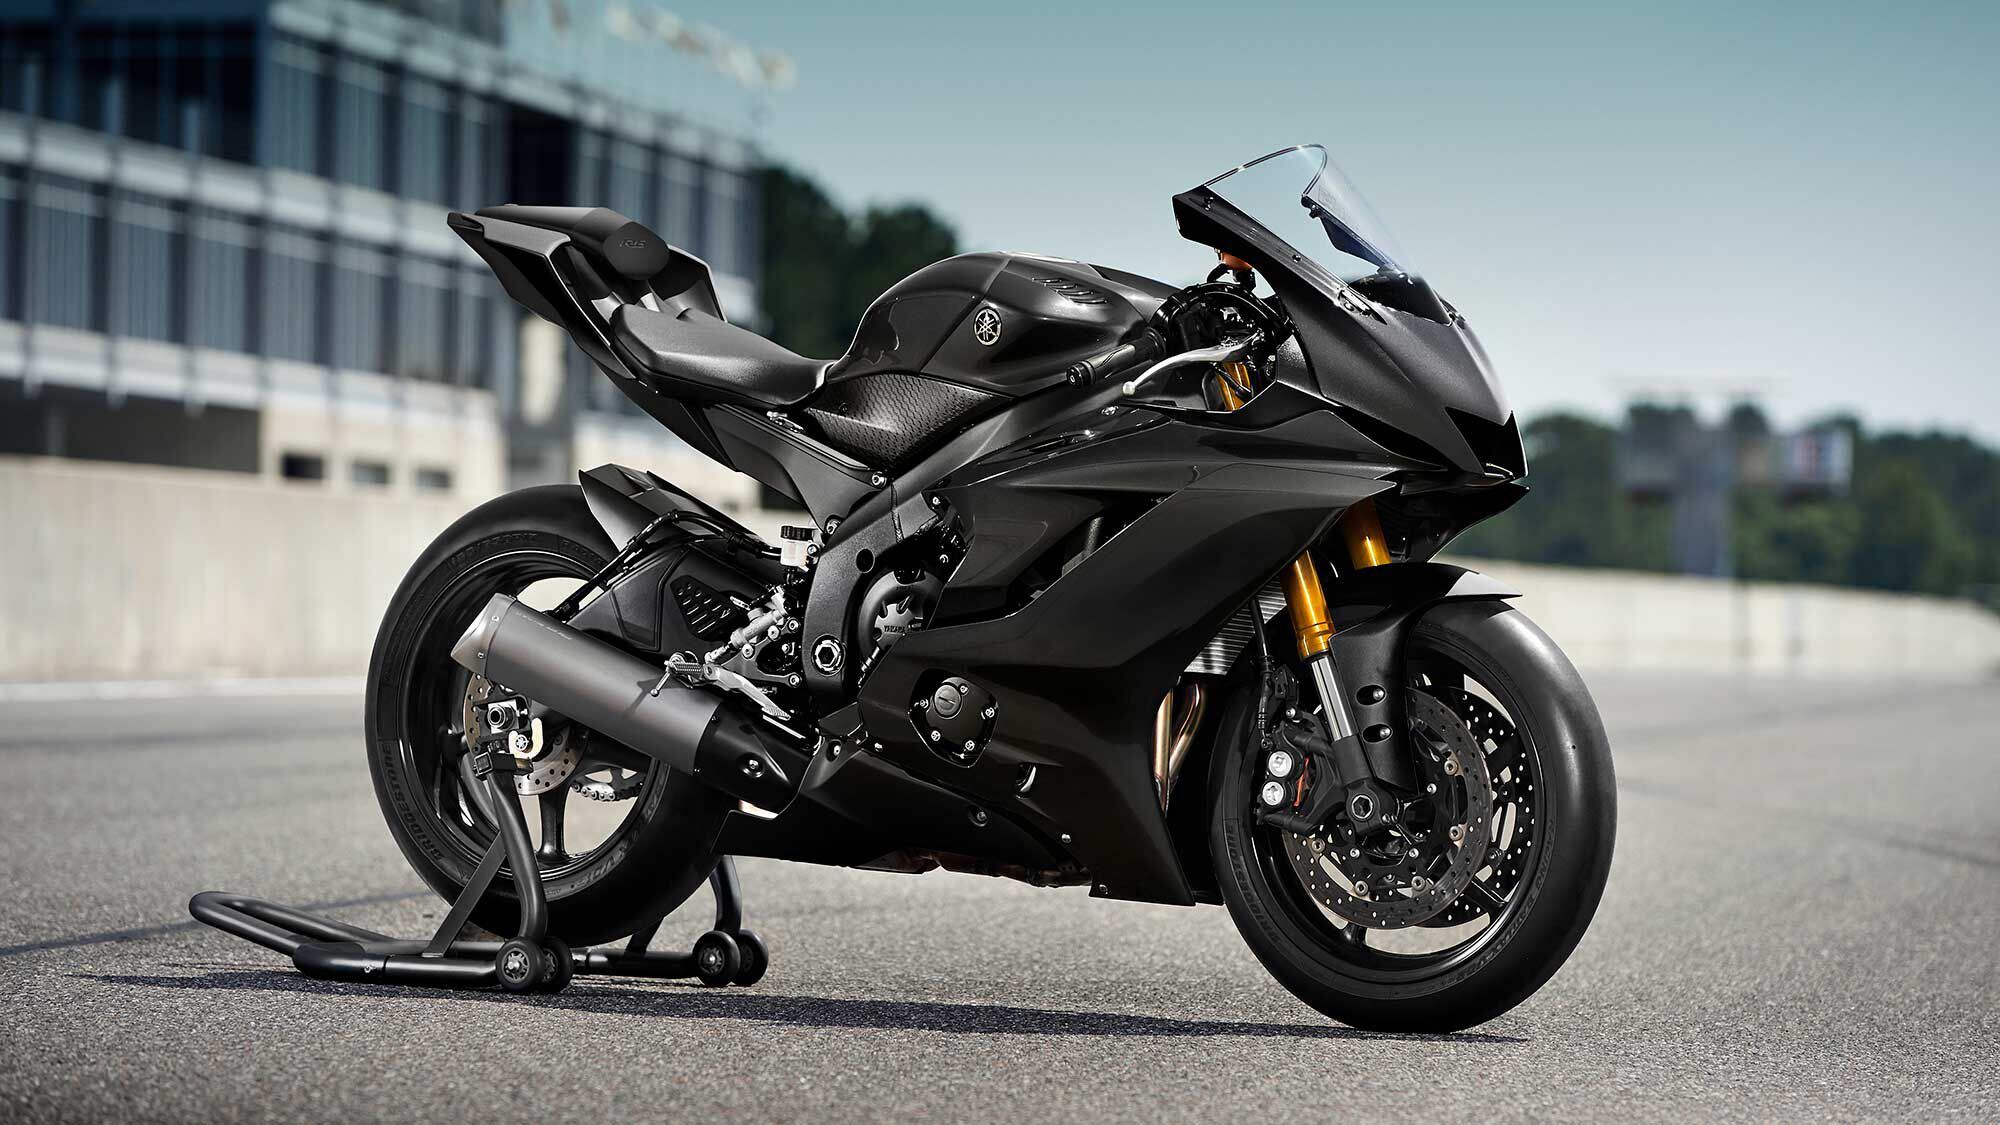 No word on whether either the YZF-R6 Race or GYTR-kitted R6 will reach North American shores despite the photos, which look like they were acquired at Barber Motorsports Park.